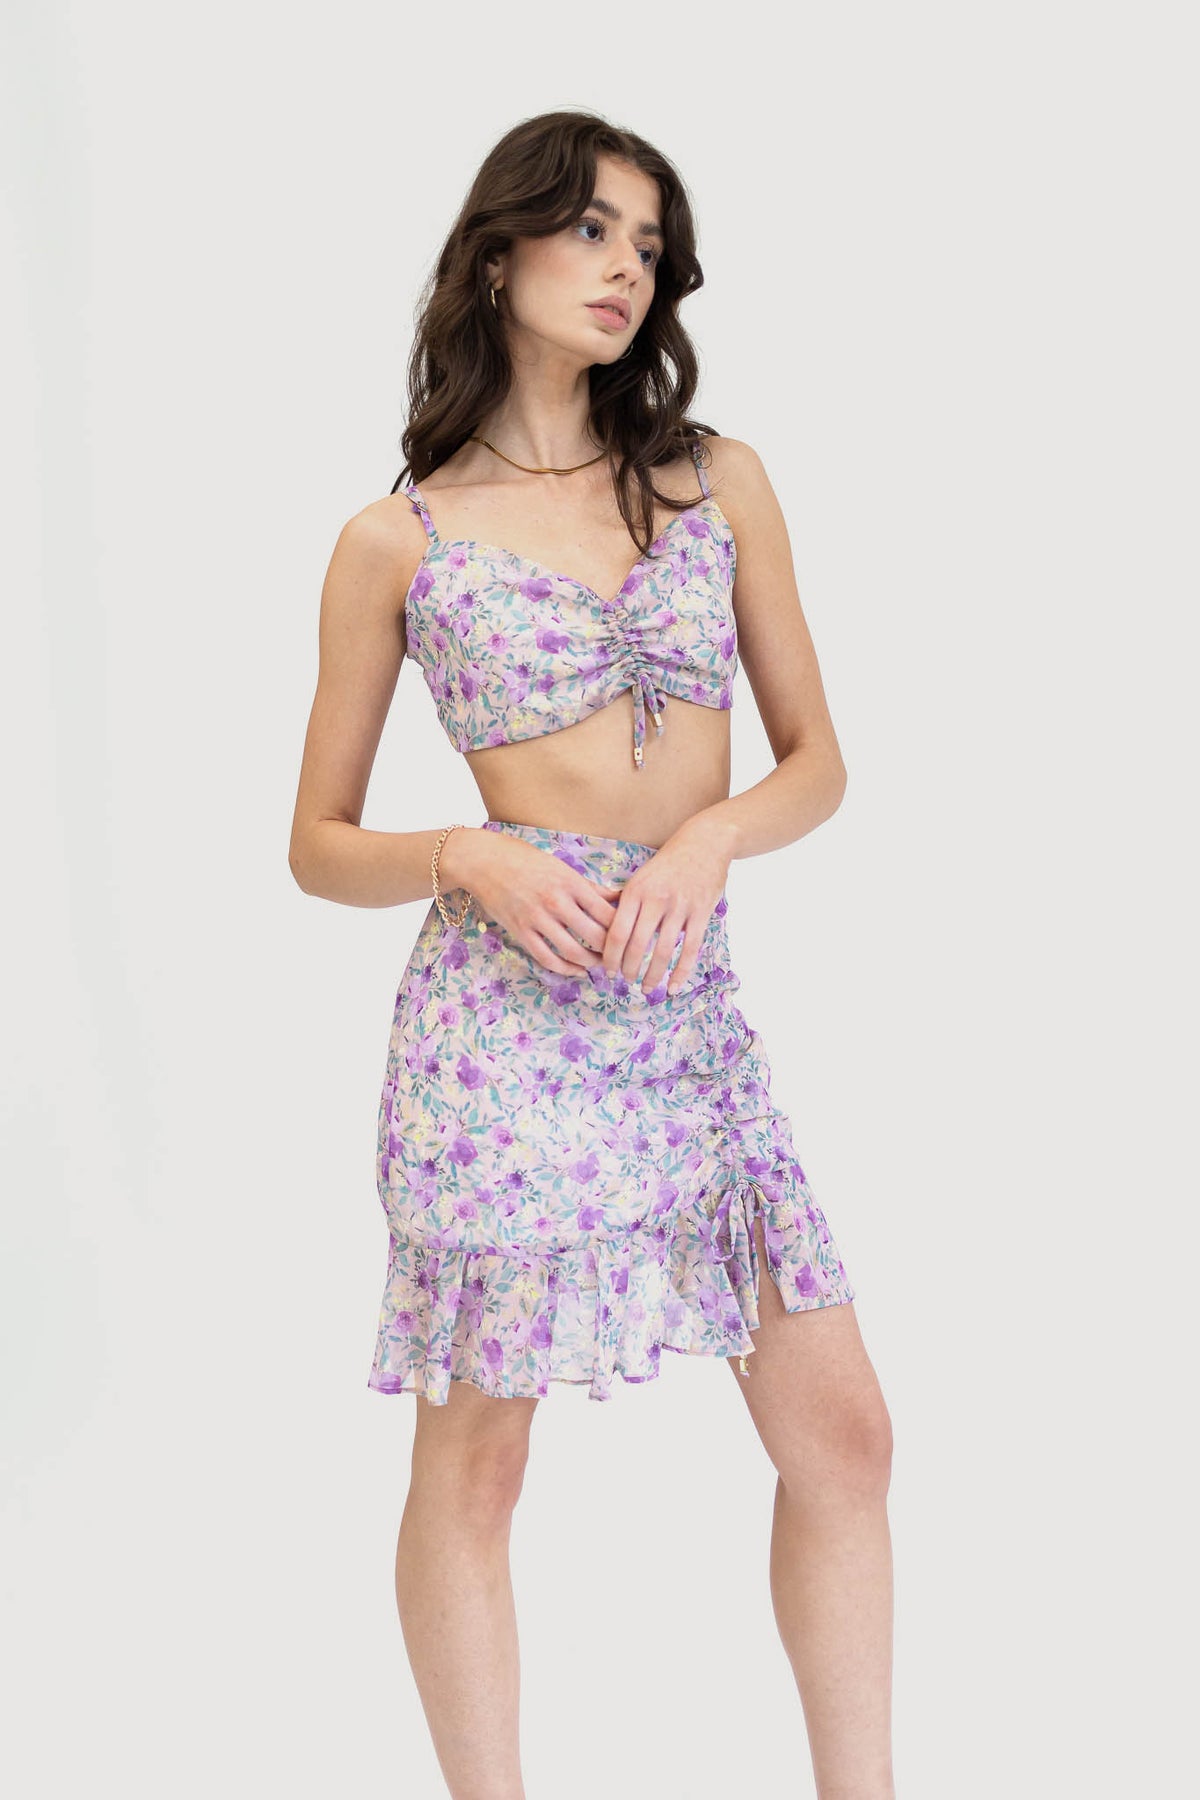 Model wearing a floral ruched crop top with adjustable spaghetti straps and a matching high-waisted skirt with a ruffled hem.